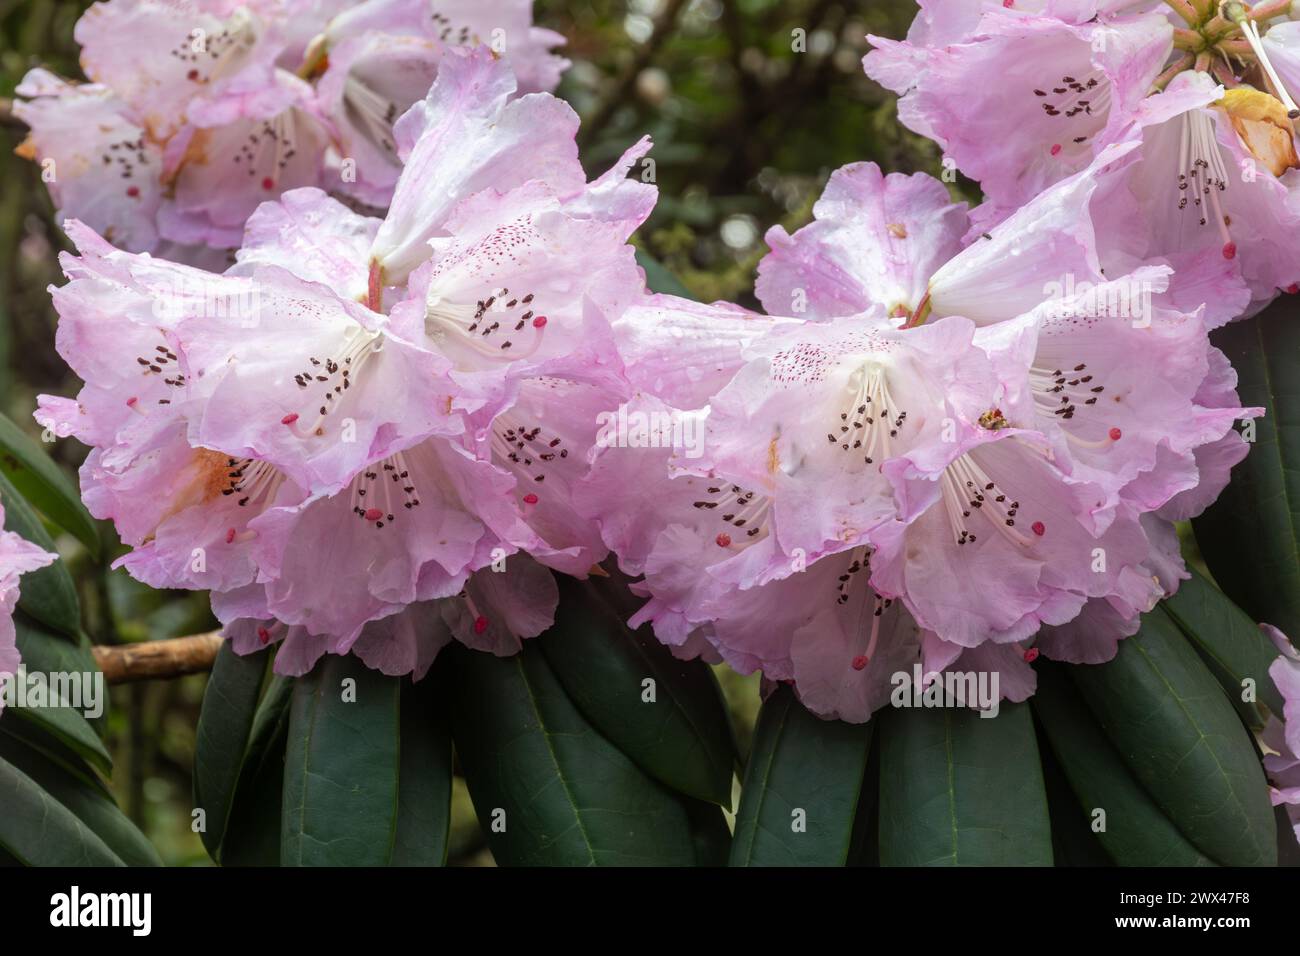 Rhododendron sutchuenense (Szechwan rhododendron), large evergreen shrub or tree with pale pink blooms flowers during spring, UK garden Stock Photo